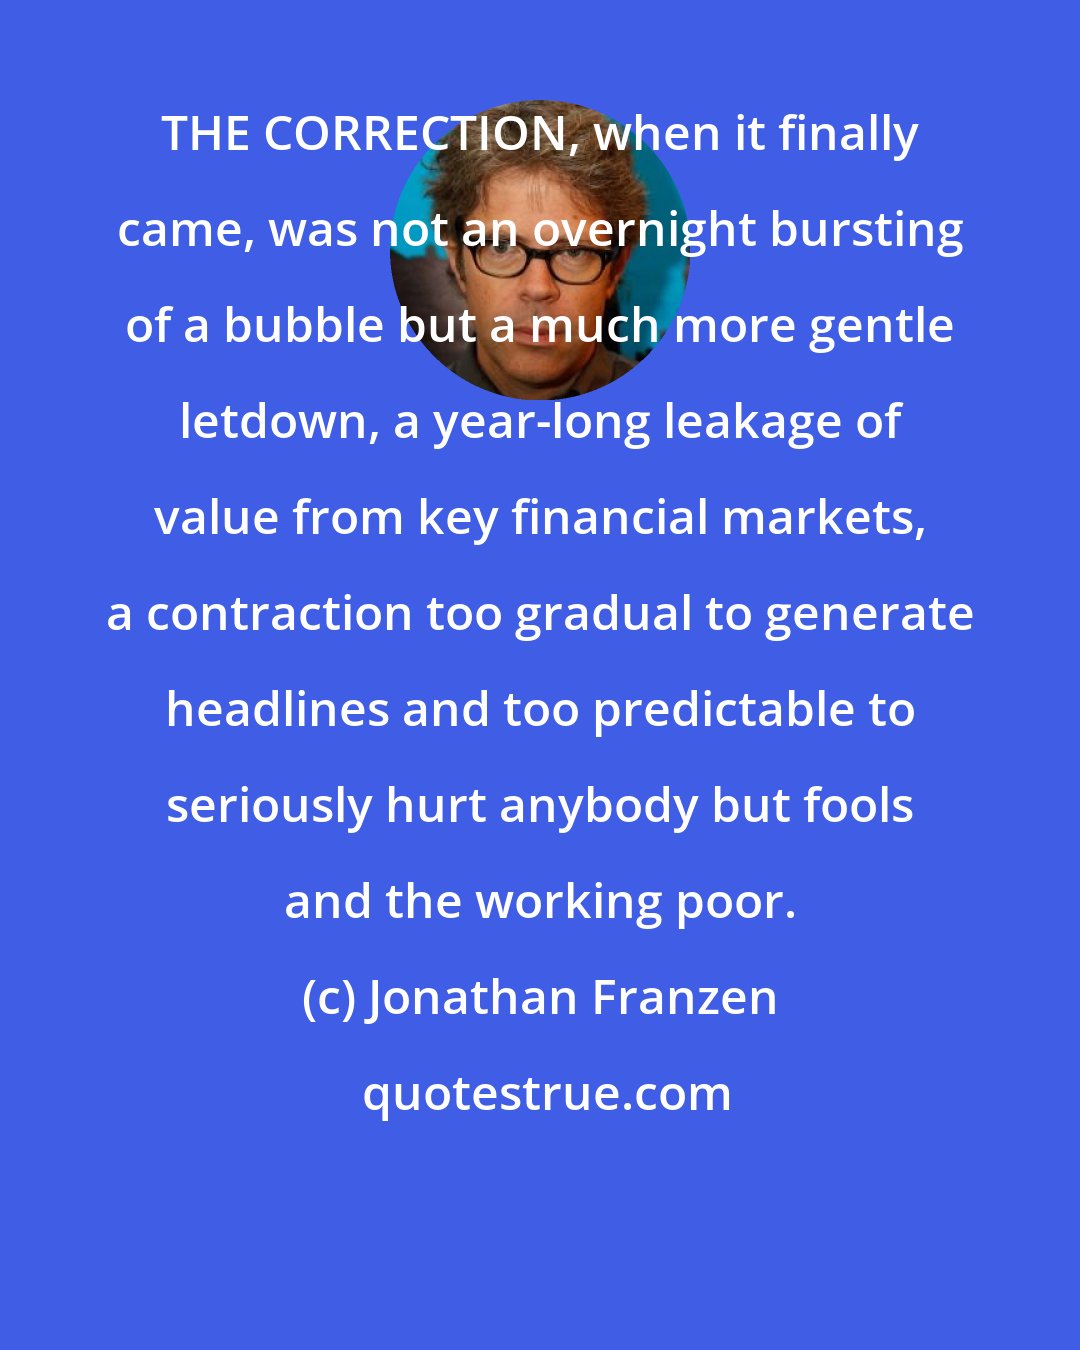 Jonathan Franzen: THE CORRECTION, when it finally came, was not an overnight bursting of a bubble but a much more gentle letdown, a year-long leakage of value from key financial markets, a contraction too gradual to generate headlines and too predictable to seriously hurt anybody but fools and the working poor.